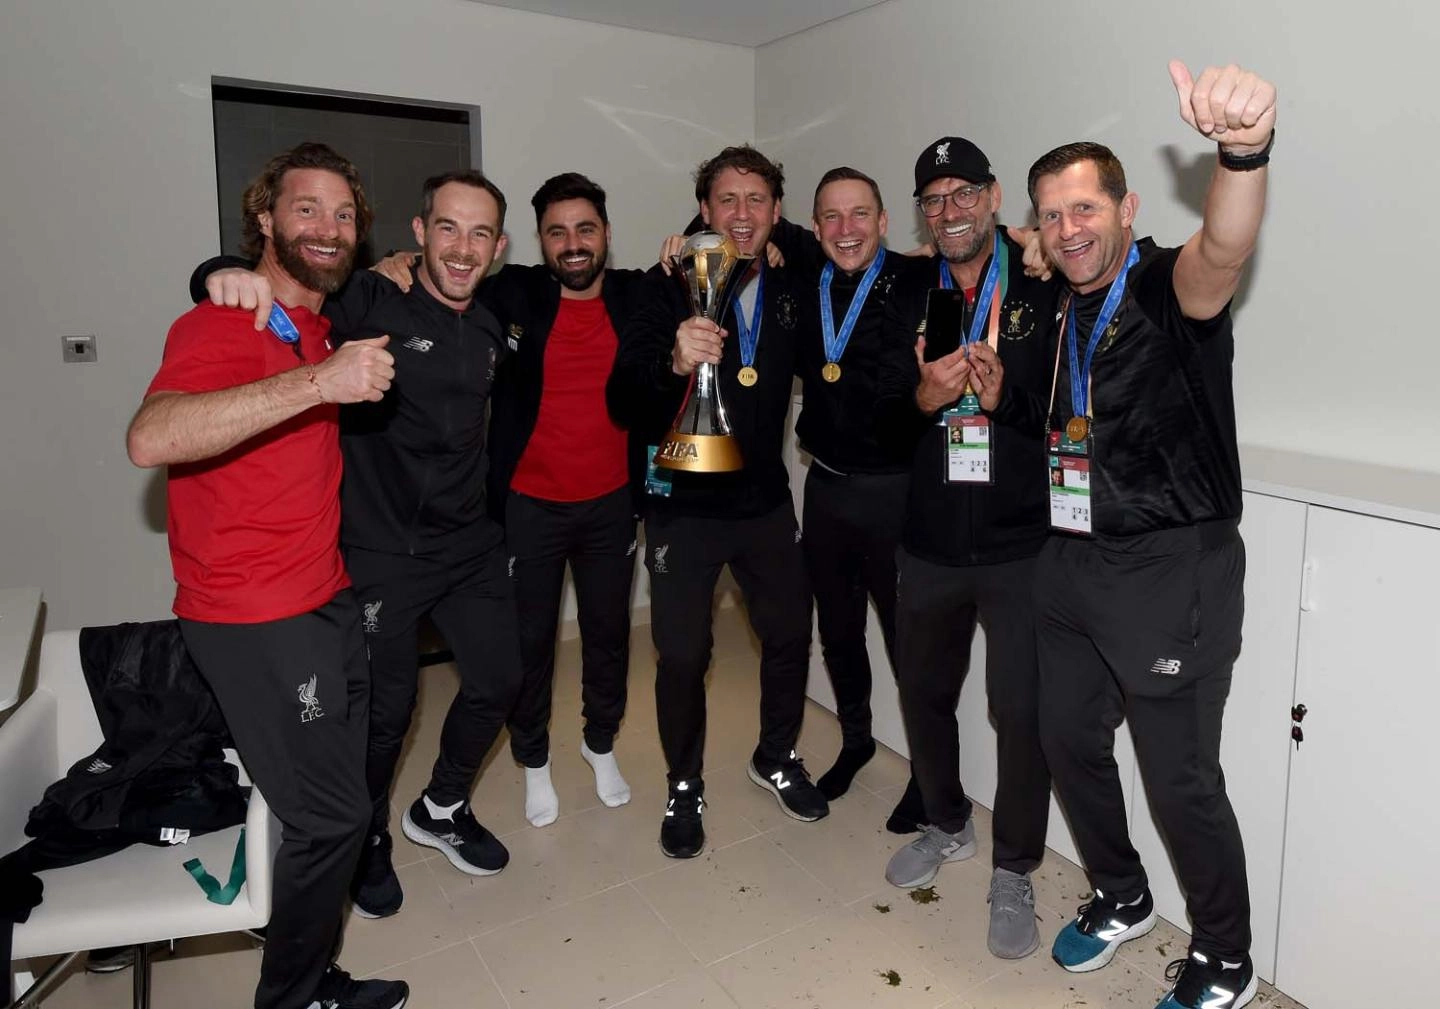 First Europe, then the world: FIFA Club World Cup champions